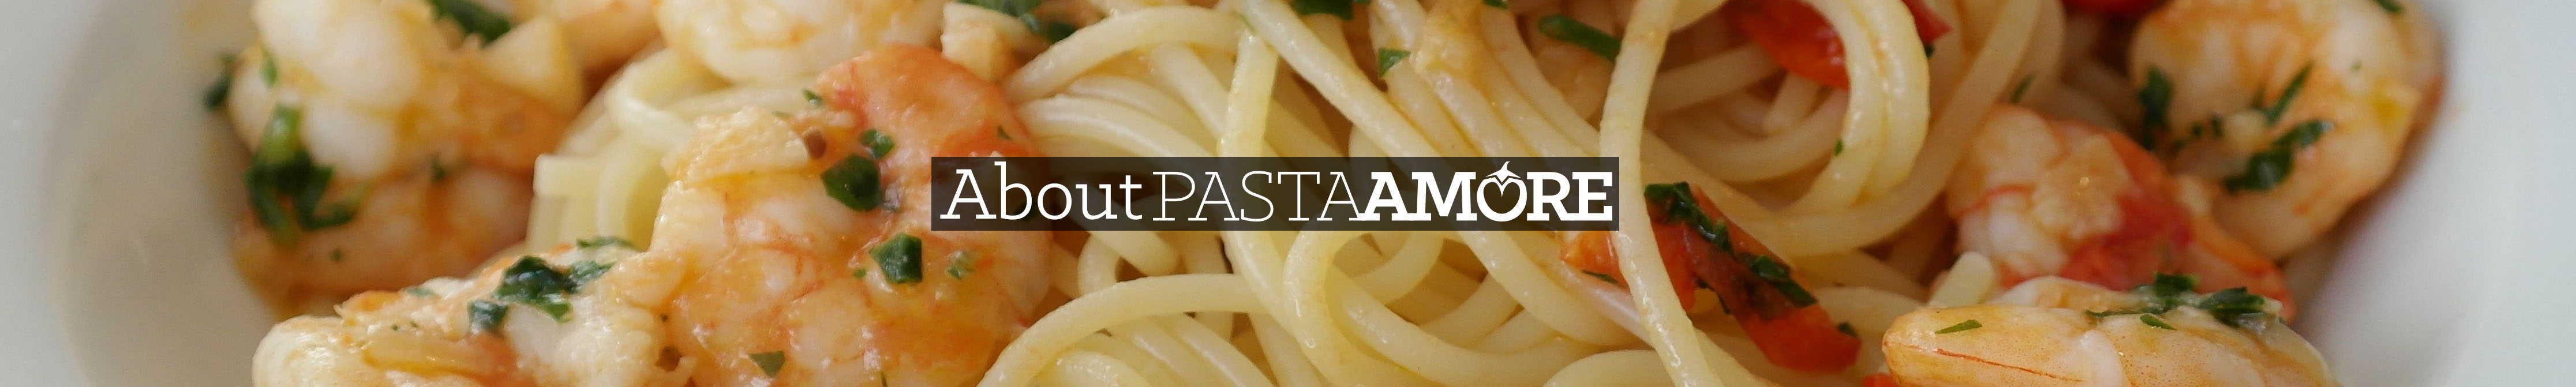 About Pasta Amore Image